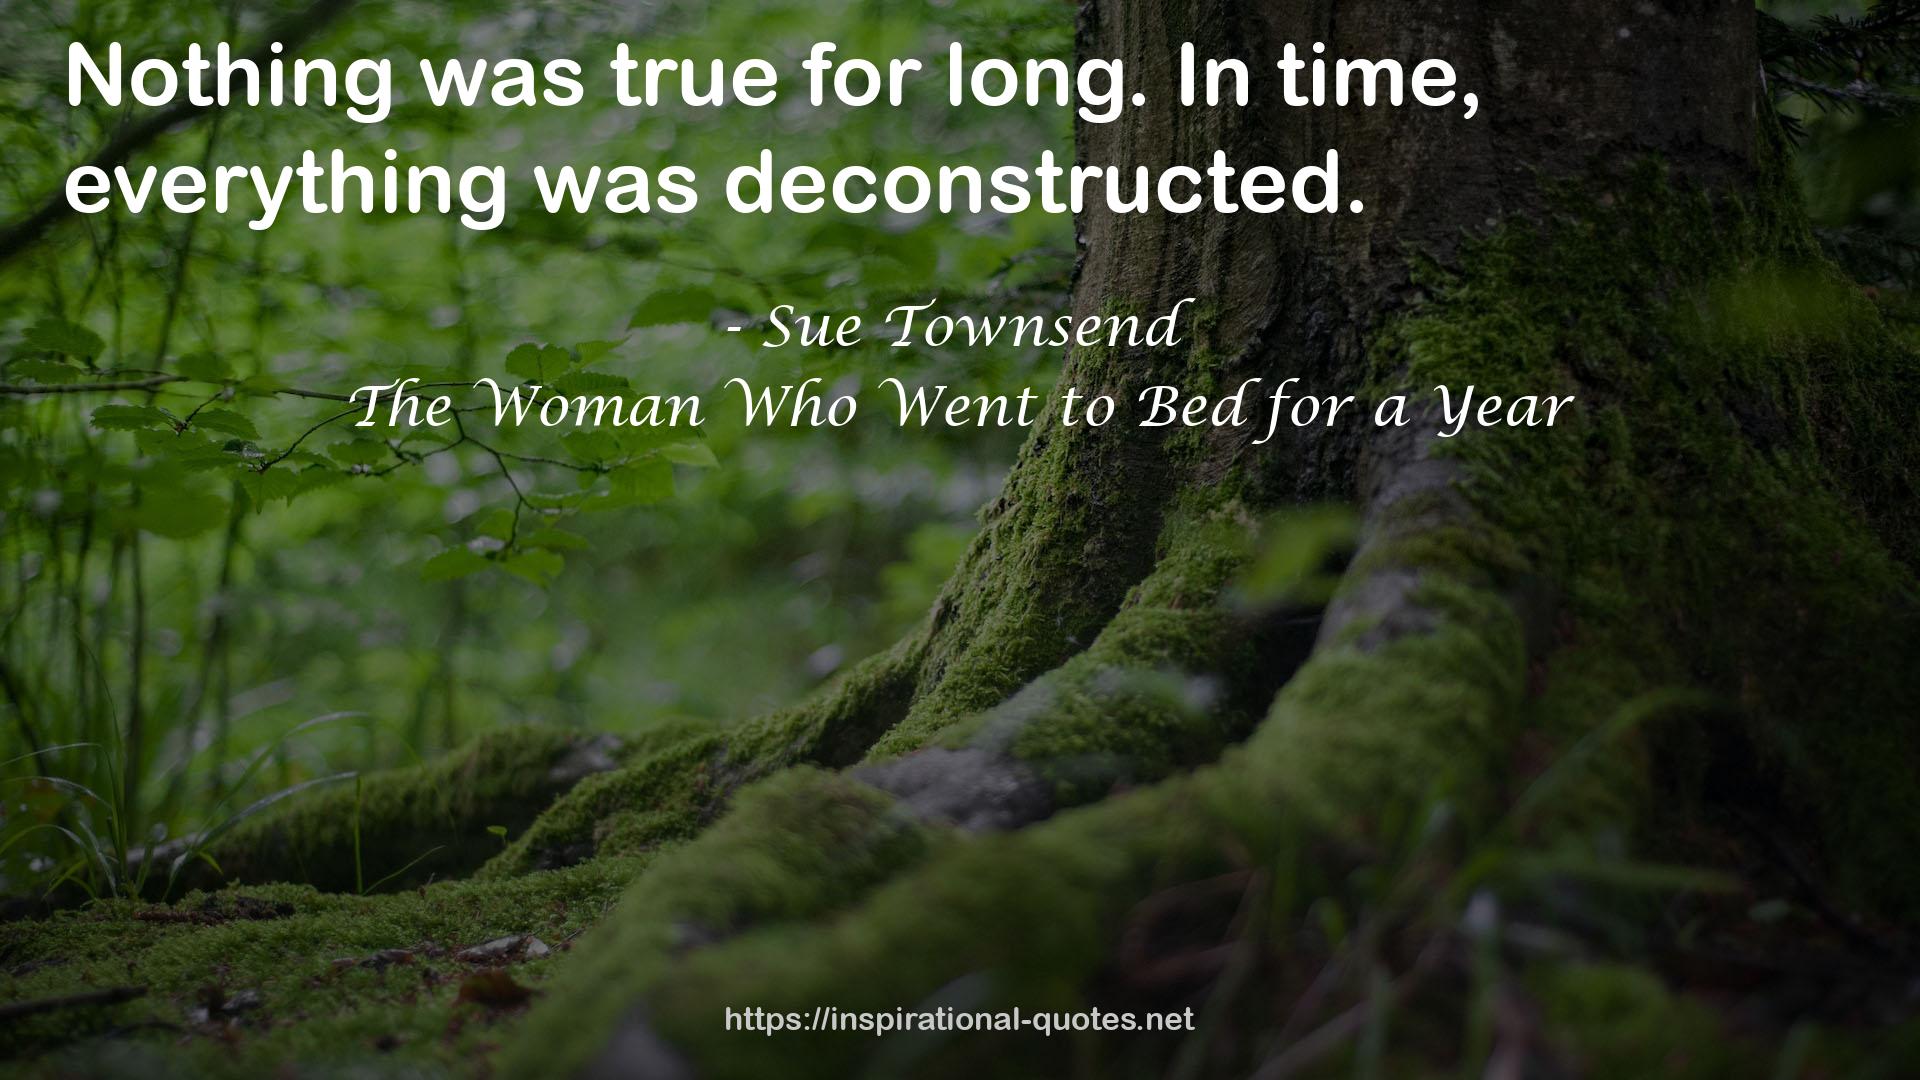 The Woman Who Went to Bed for a Year QUOTES